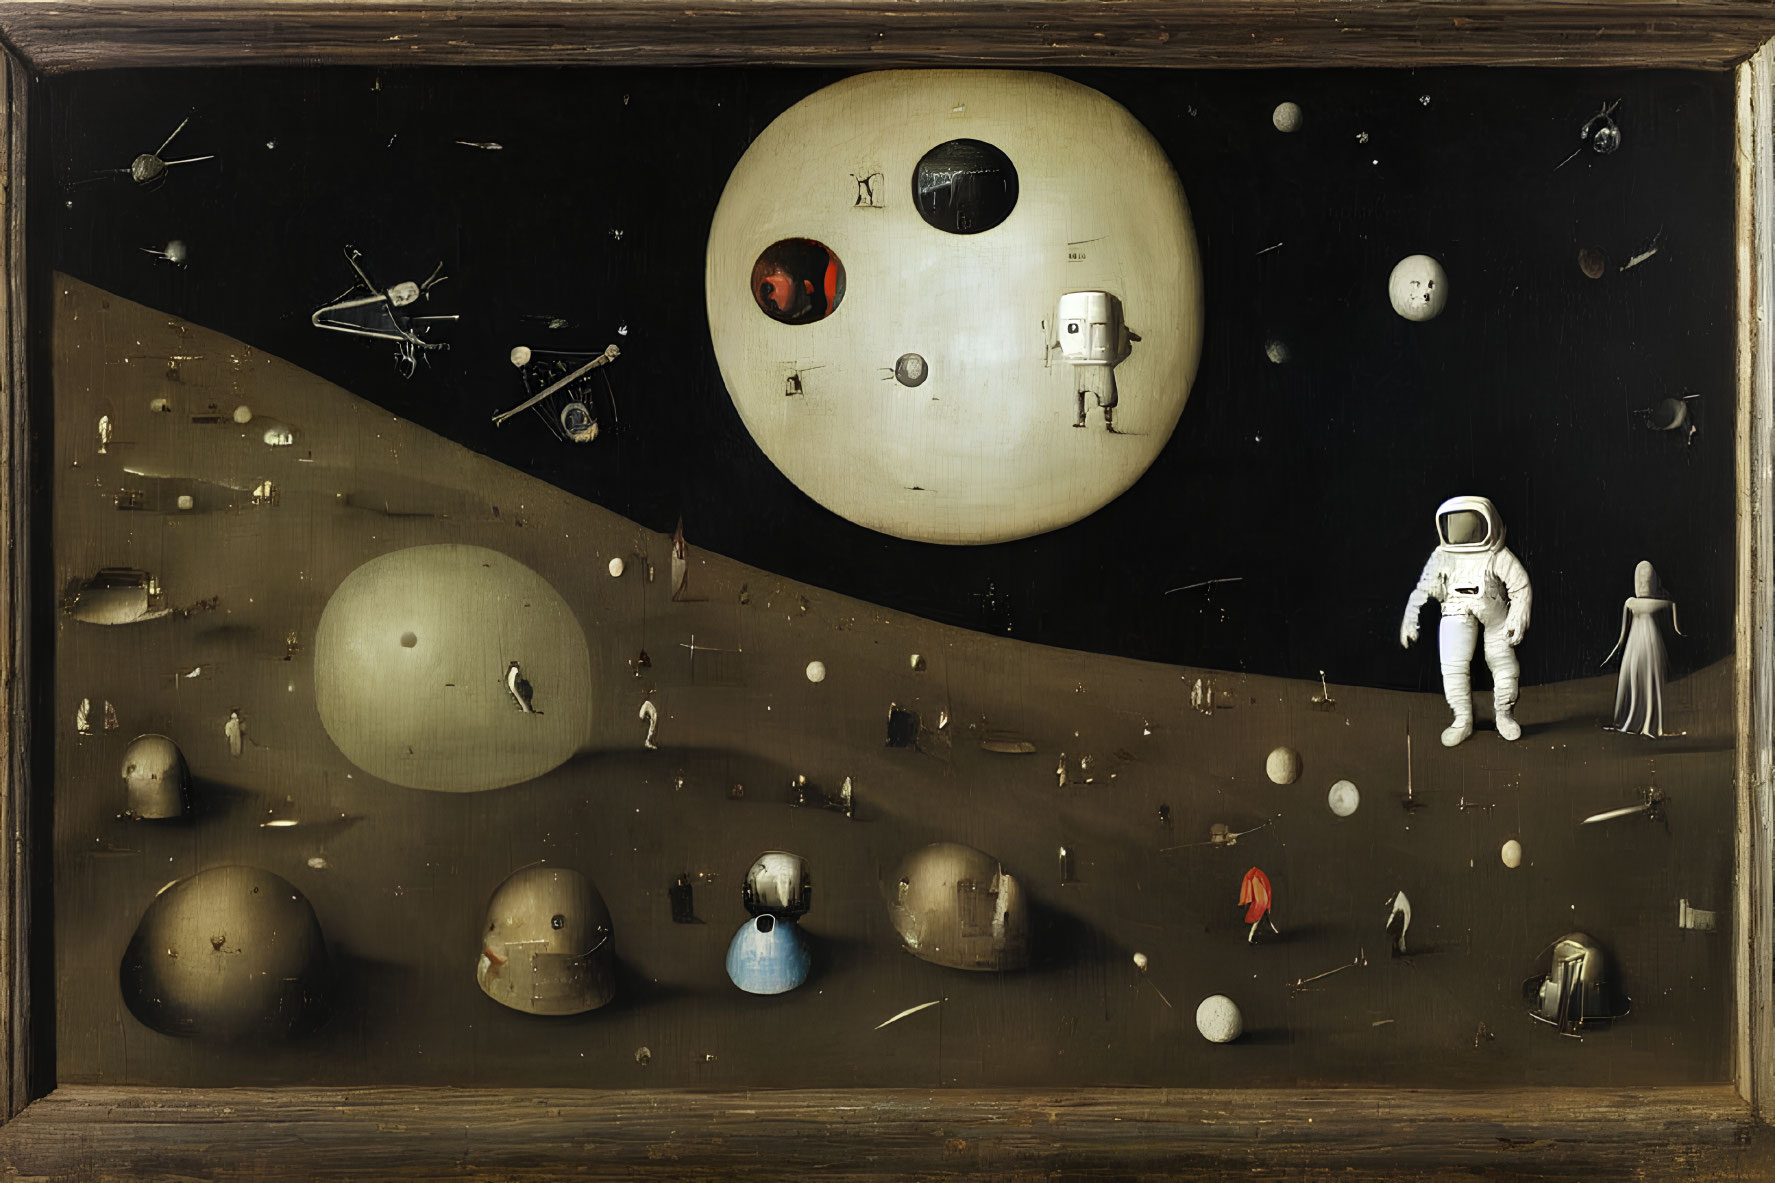 Space Exploration Collage with Planets, Astronaut, Spacecraft, Satellites, and Celestial